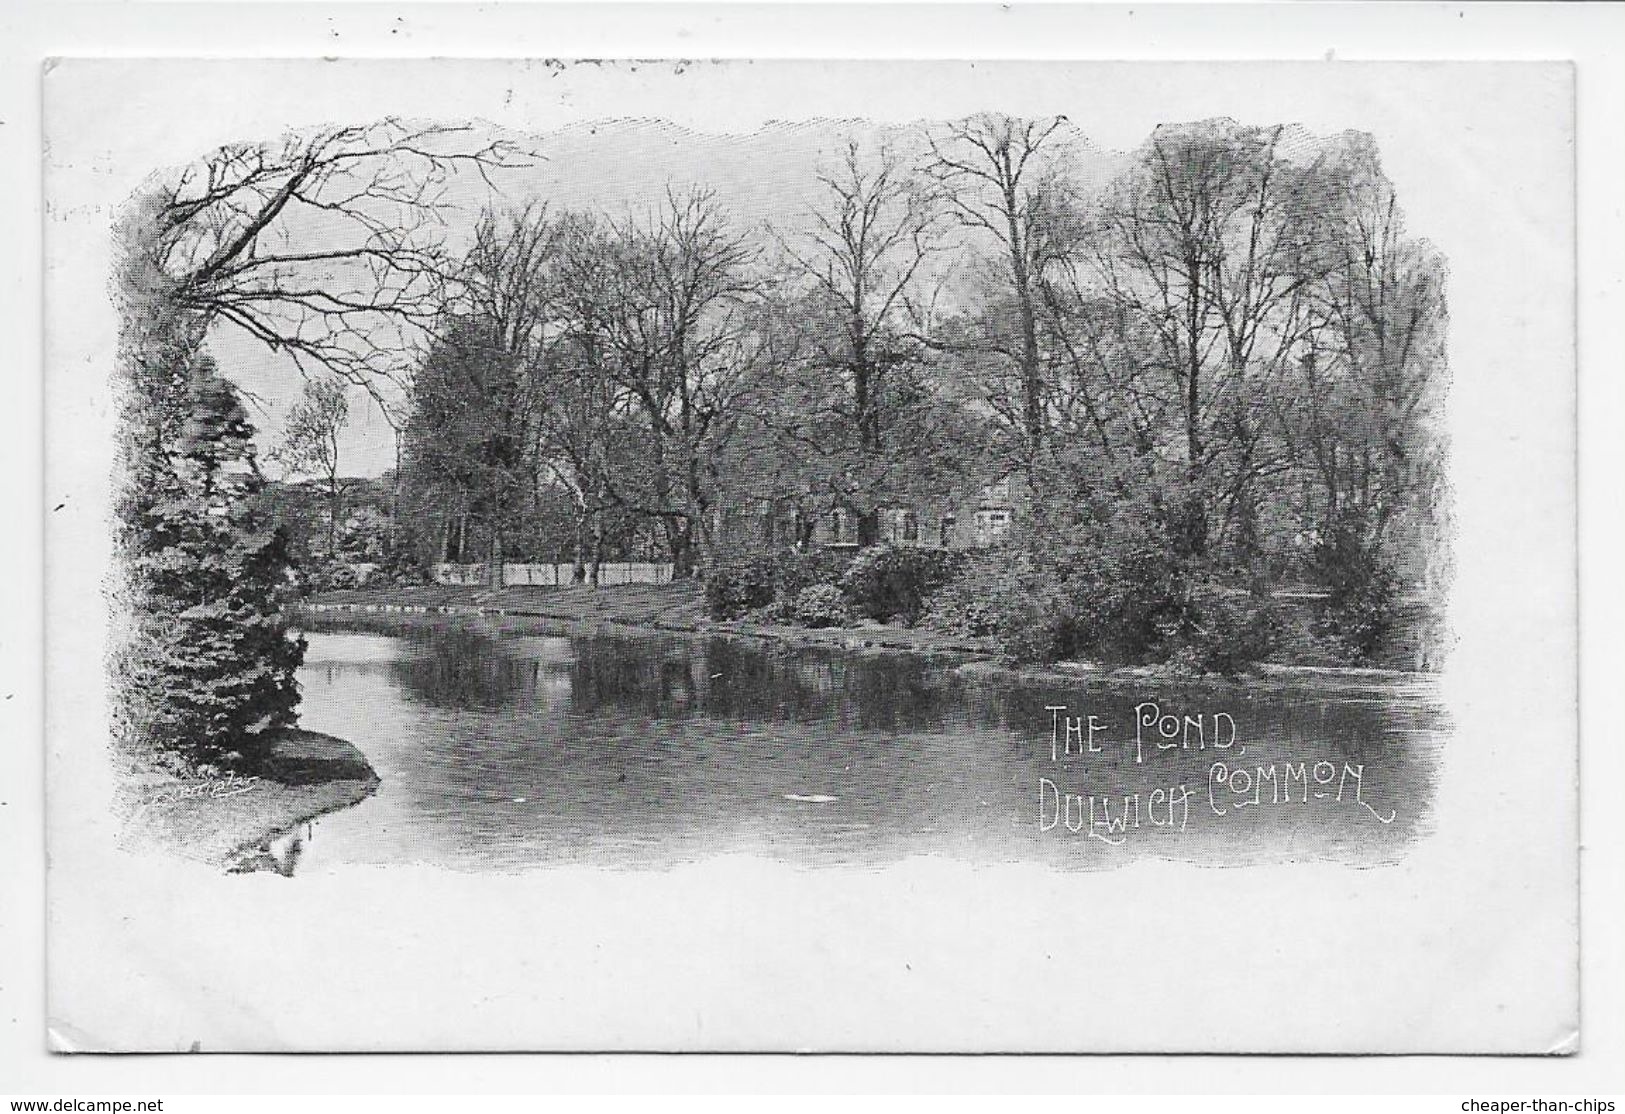 The Pond, Dulwich Common - London Suburbs